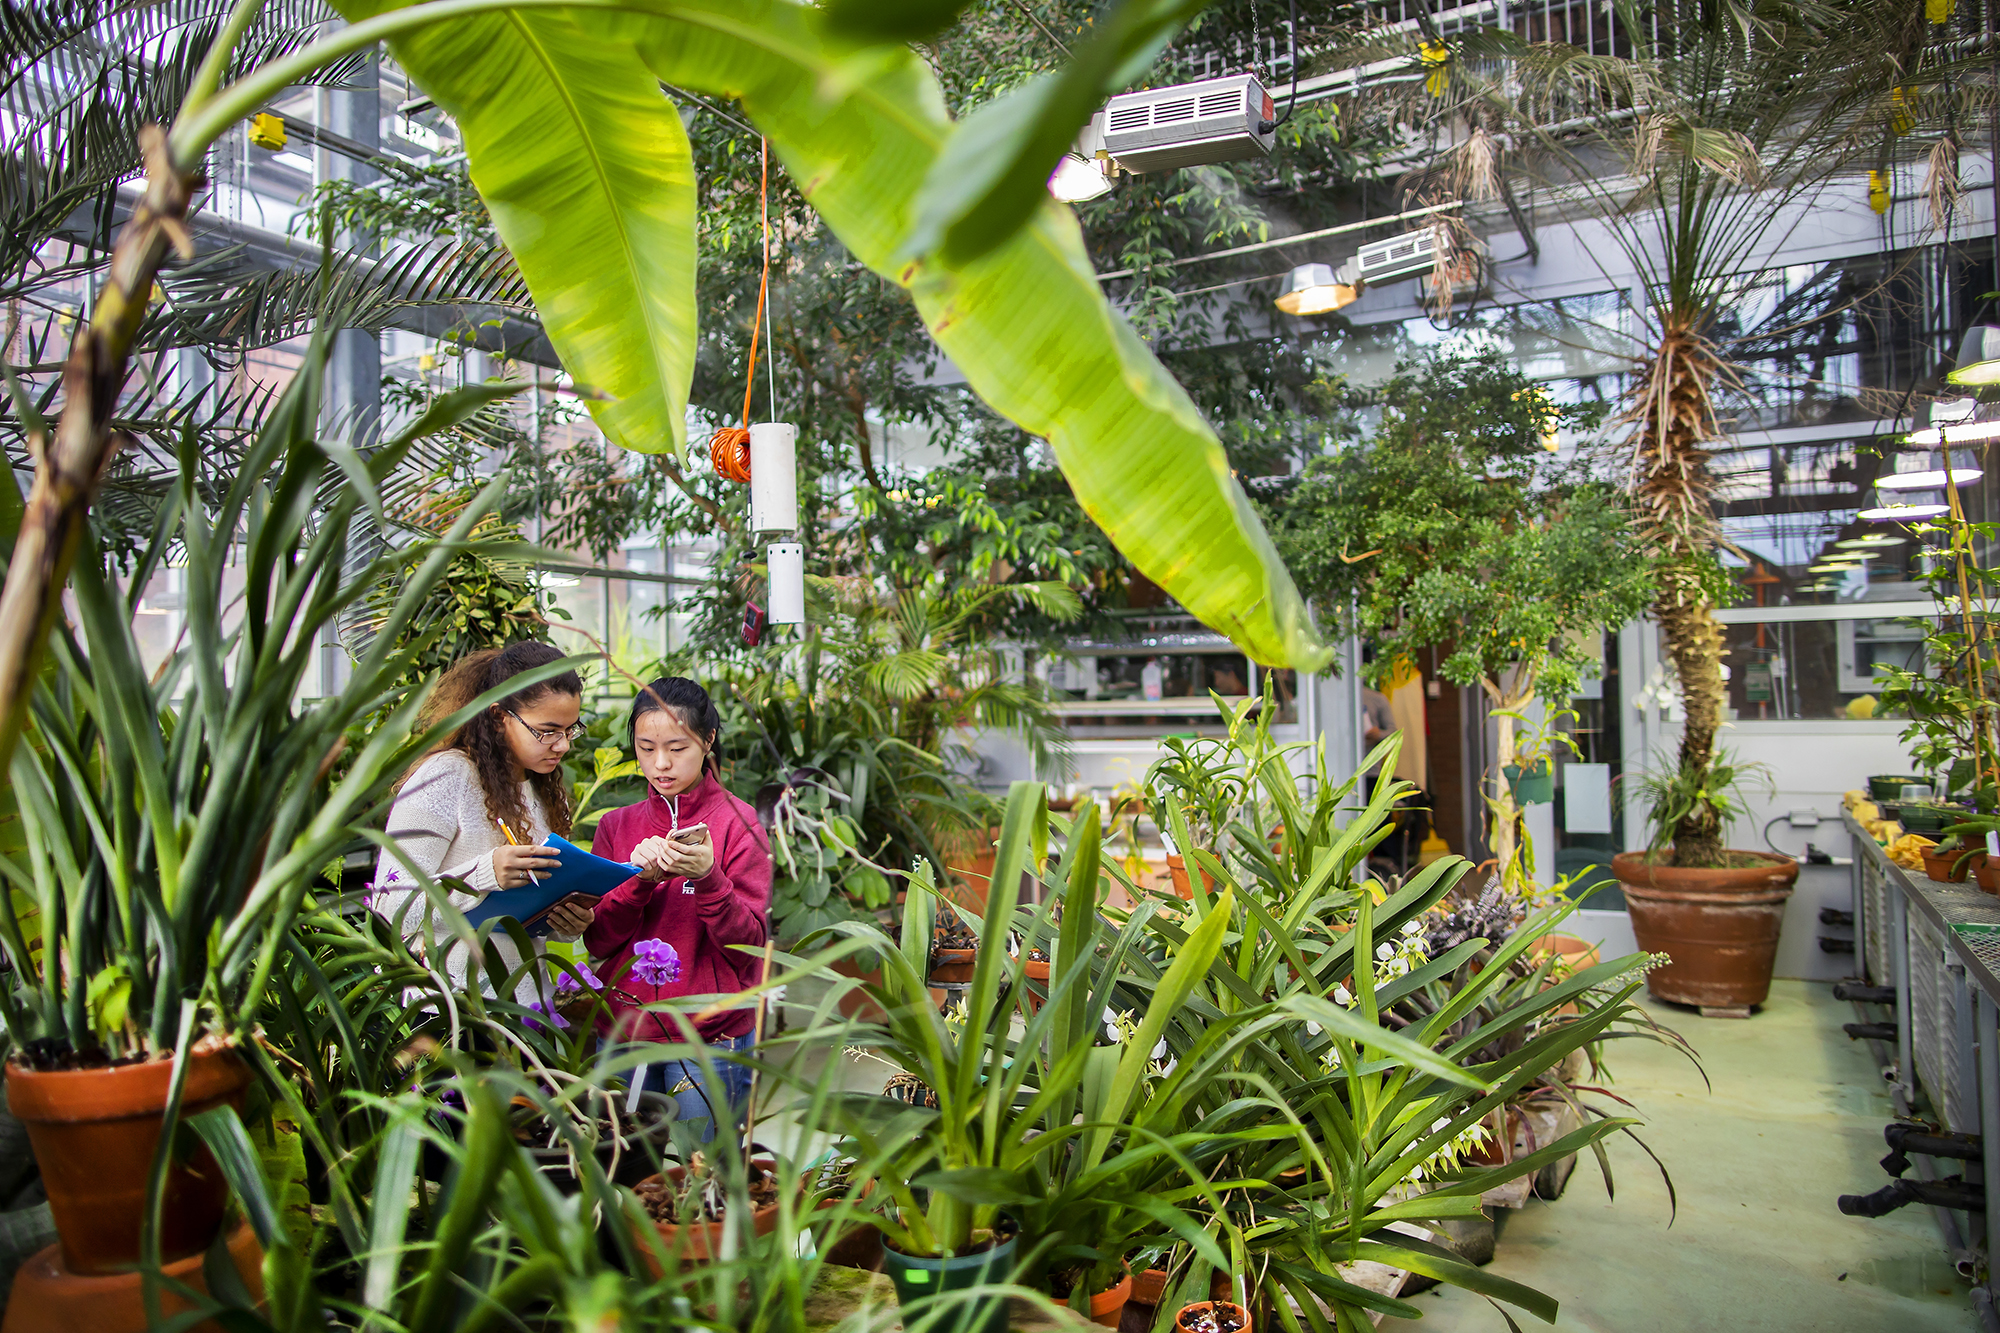 Two students examine one of their phones for information as the other holds a folder and pencil. They are framed by vibrant green plants in a greenhouse.